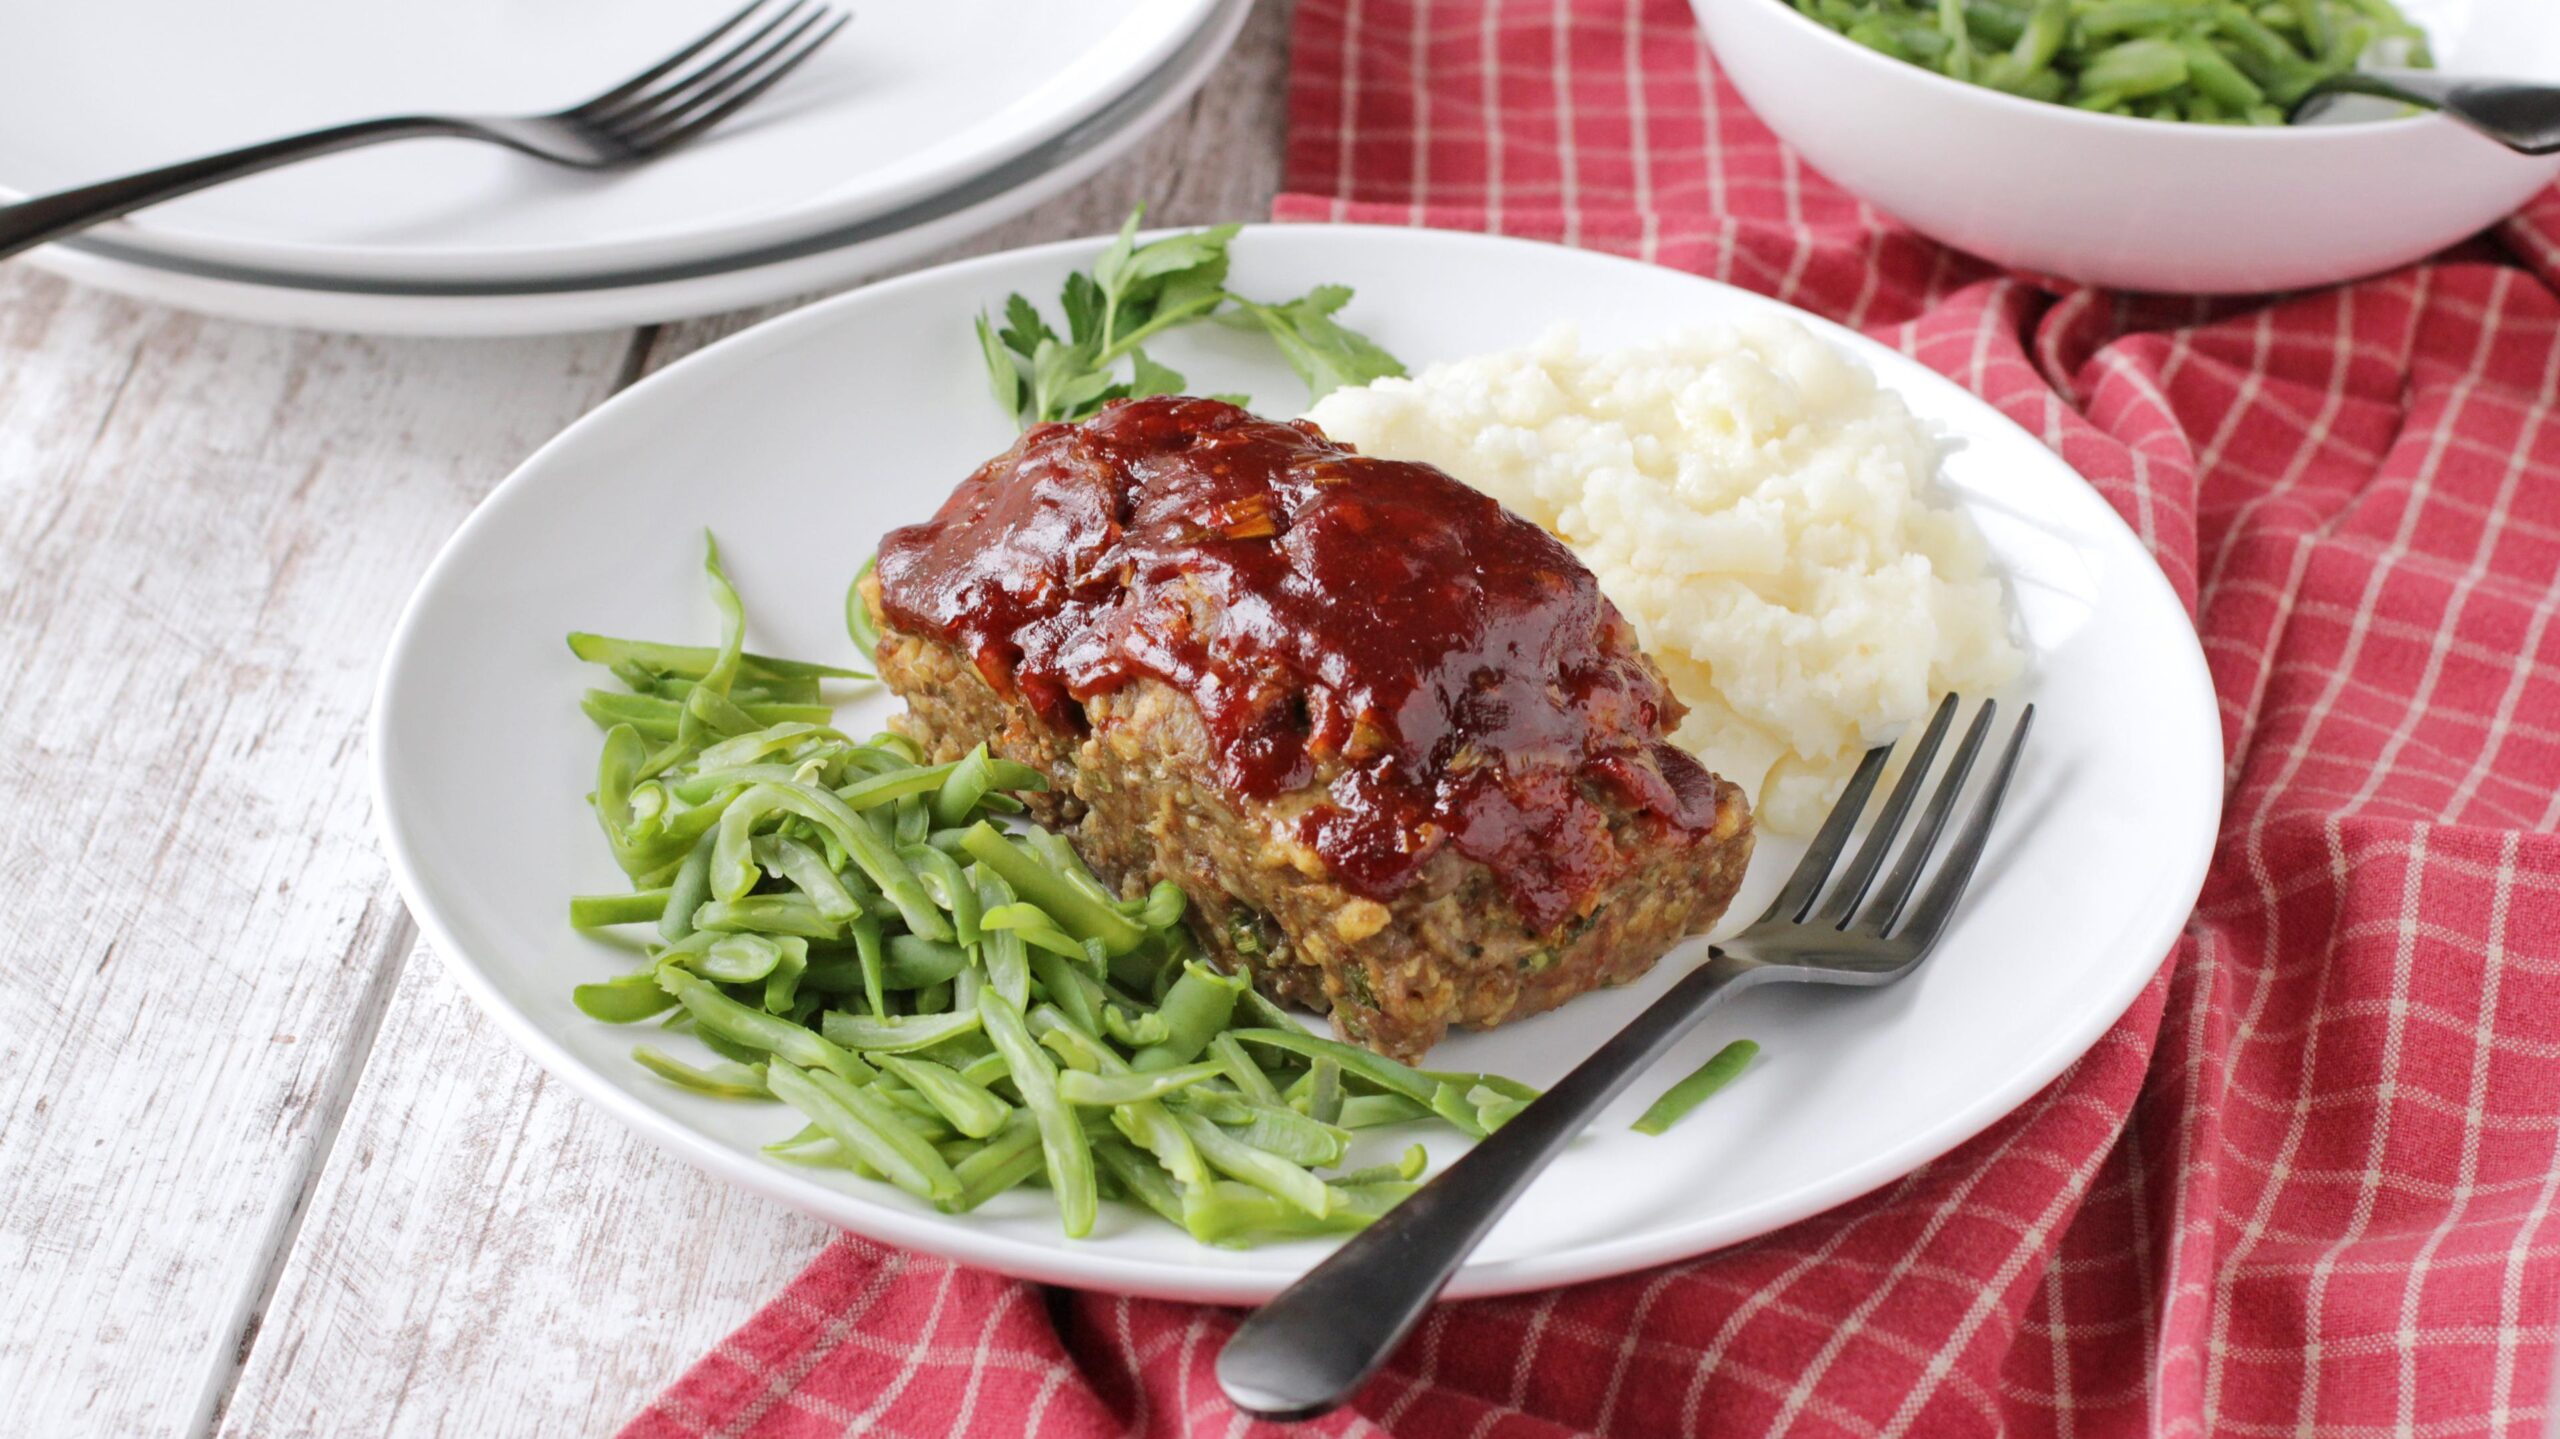 Delicious Gluten-Free Meatloaf Recipe for Meat Lovers